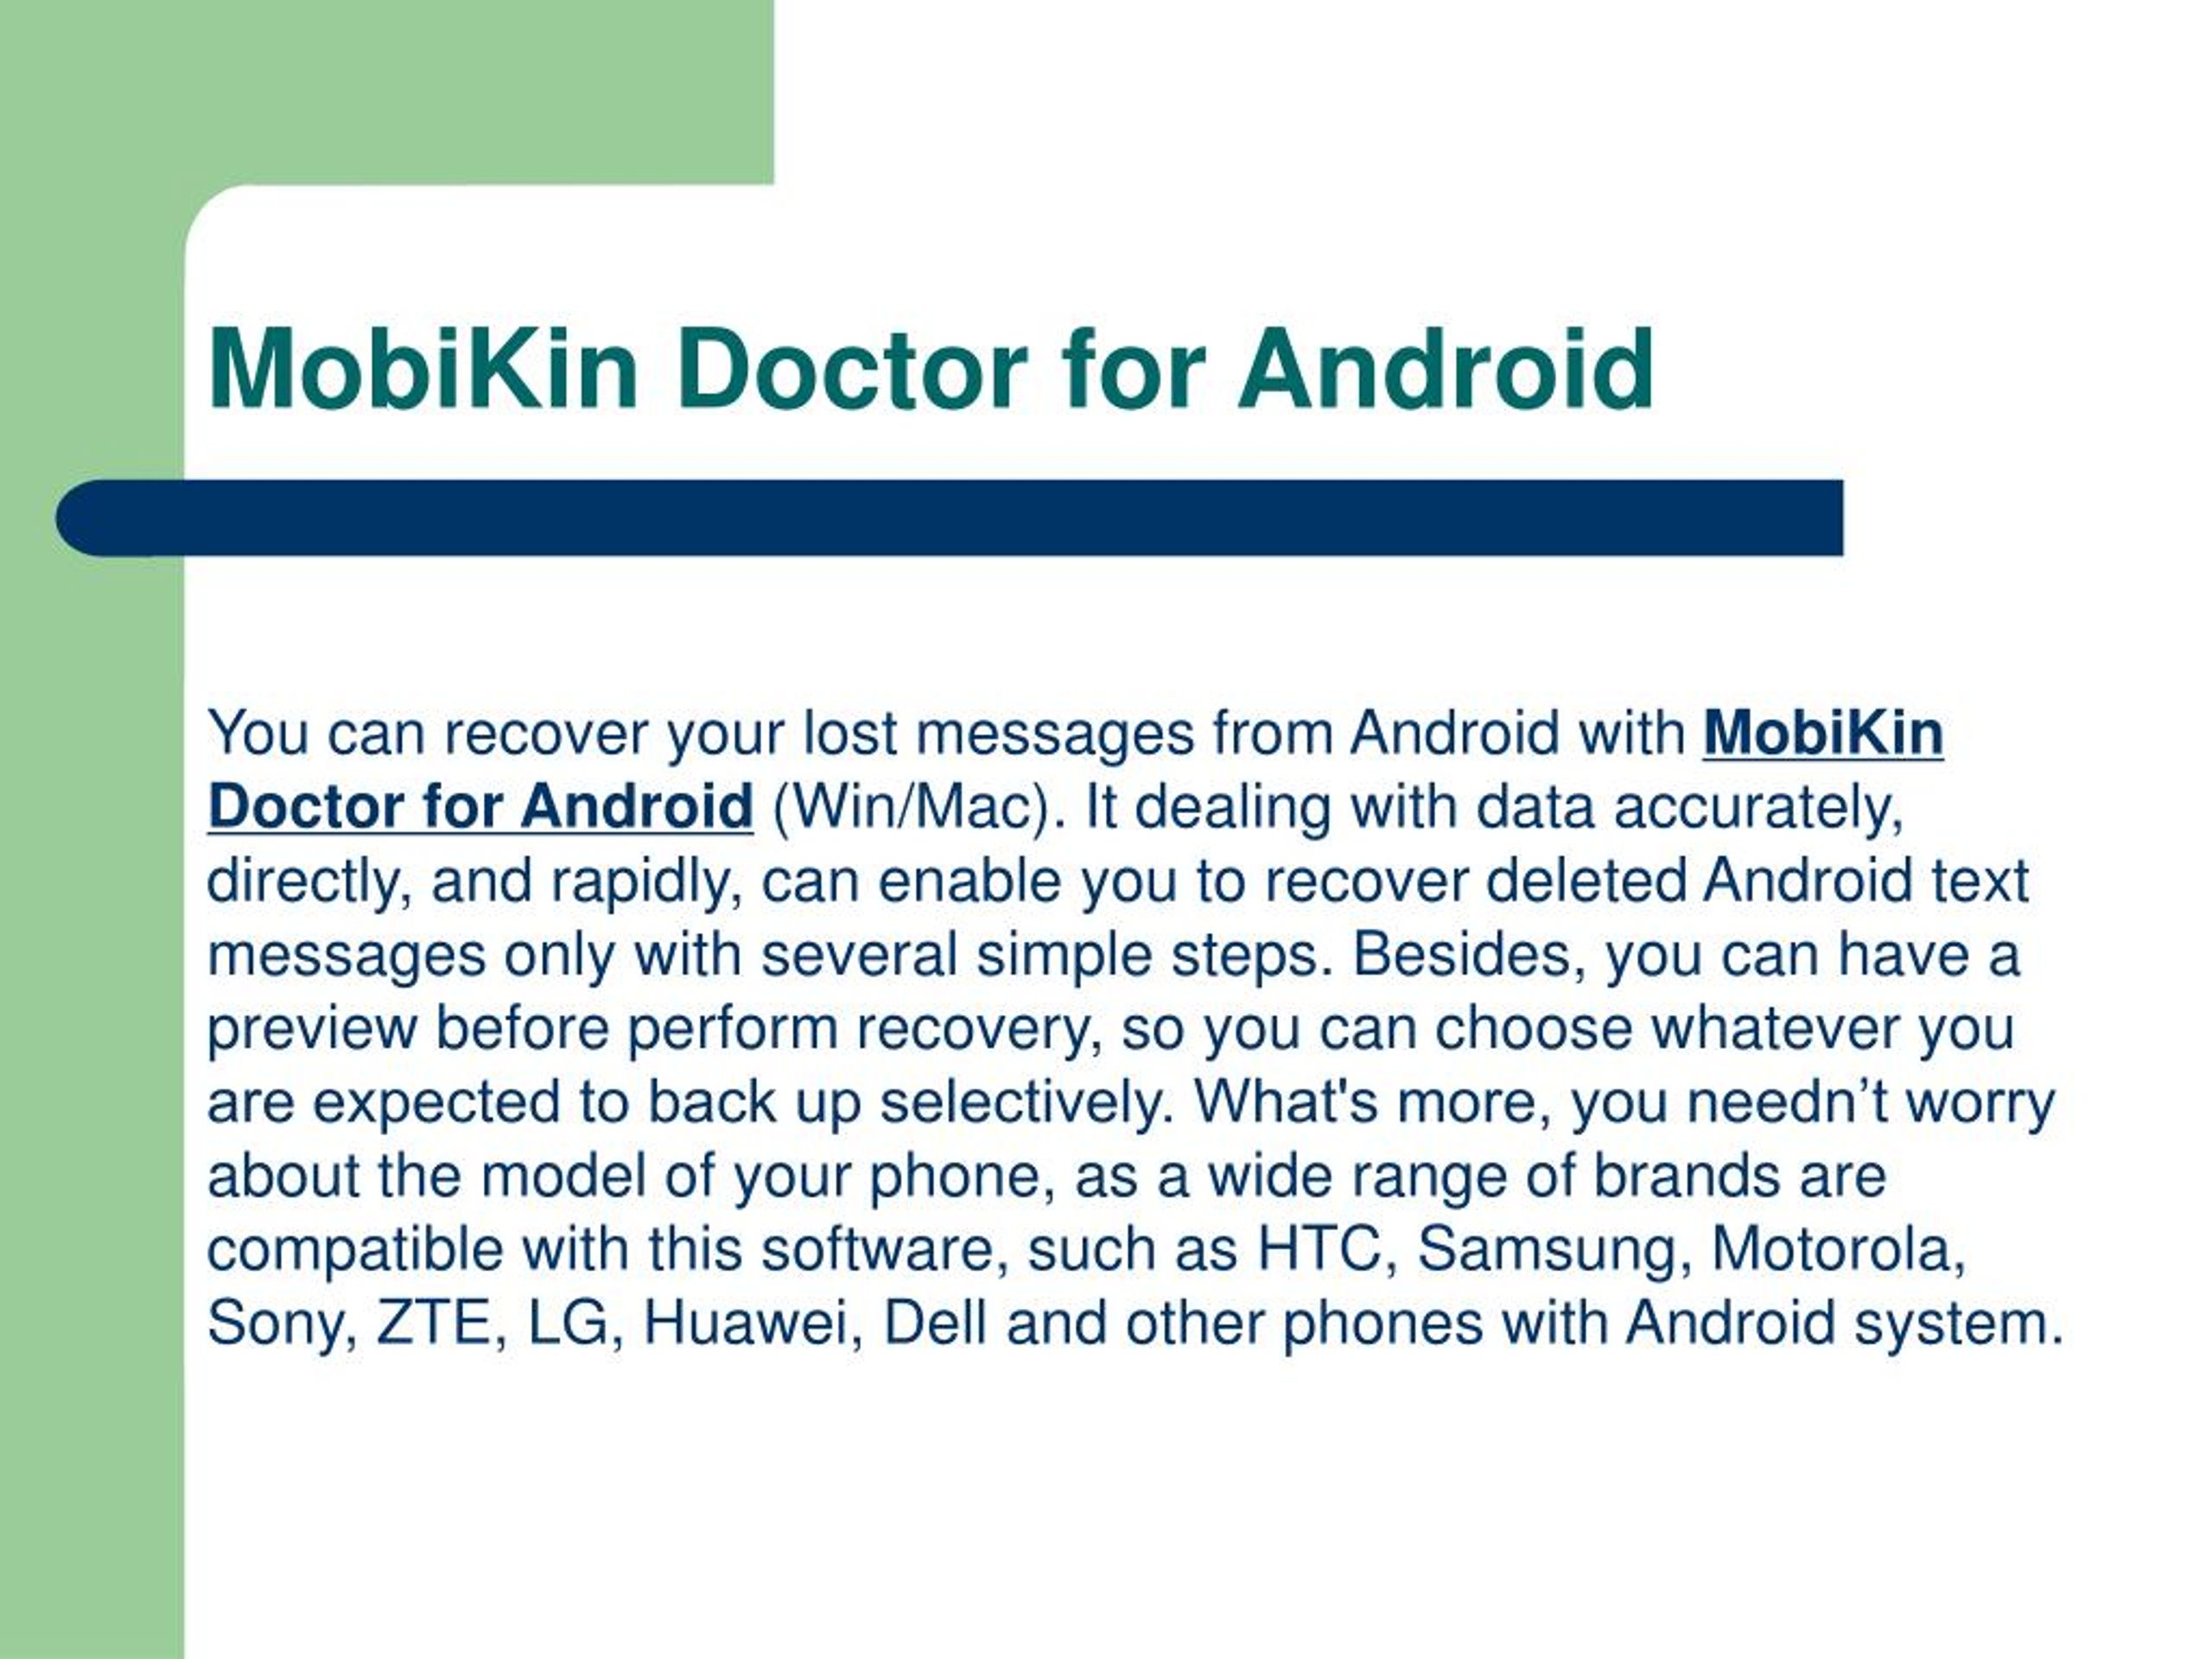 mobikin doctor for android free download